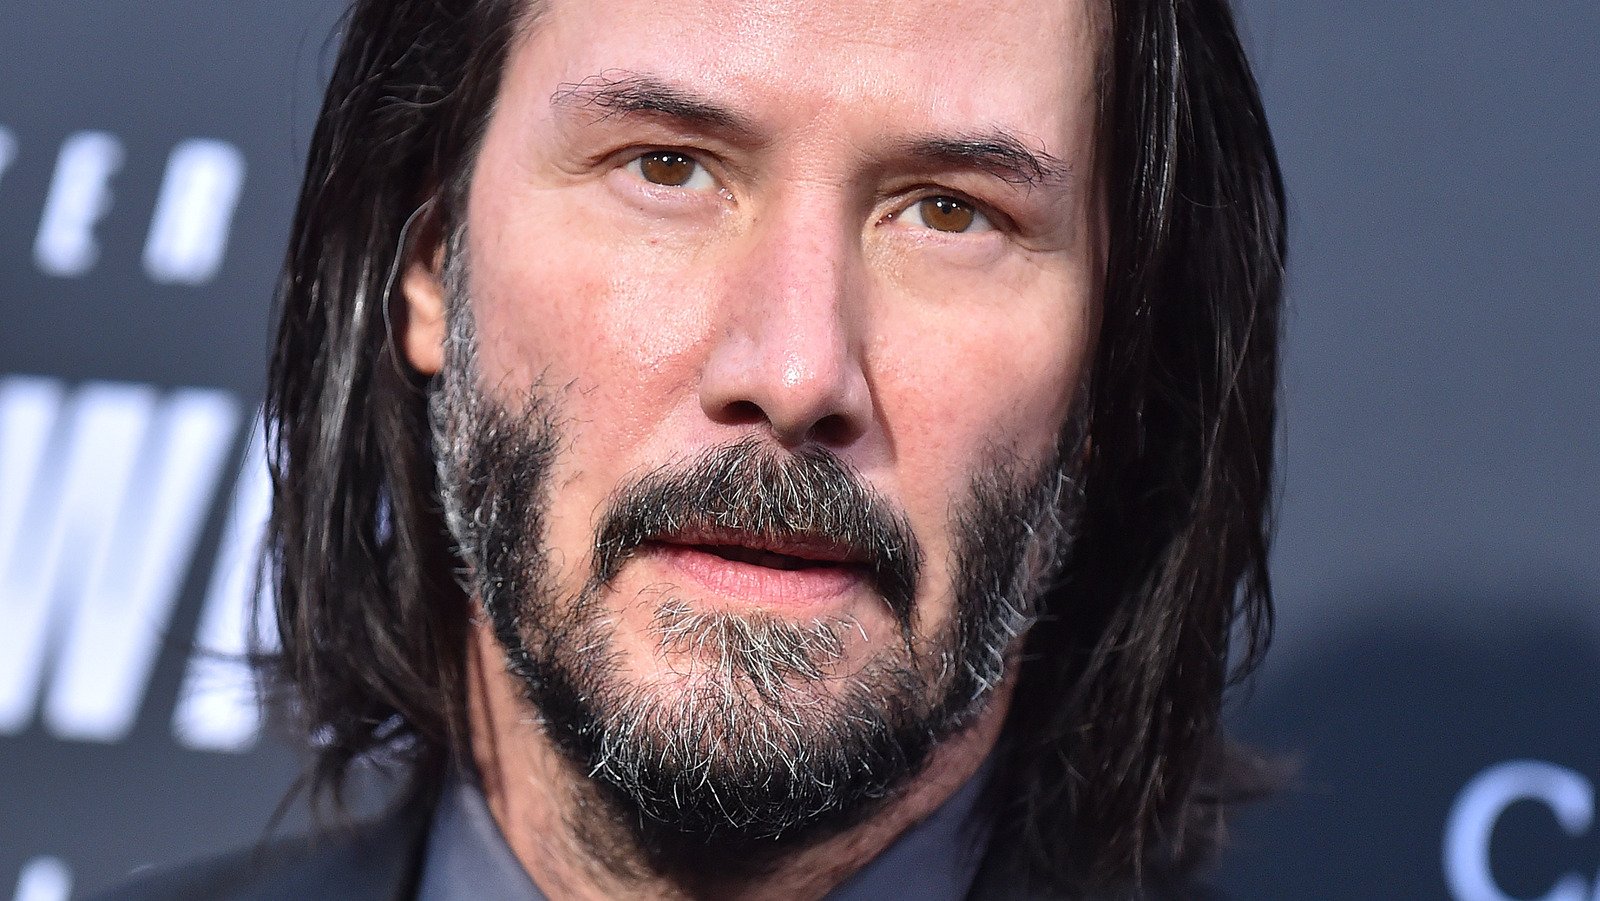 This Is The Superhero Role Keanu Reeves Is Holding Out For - Looper